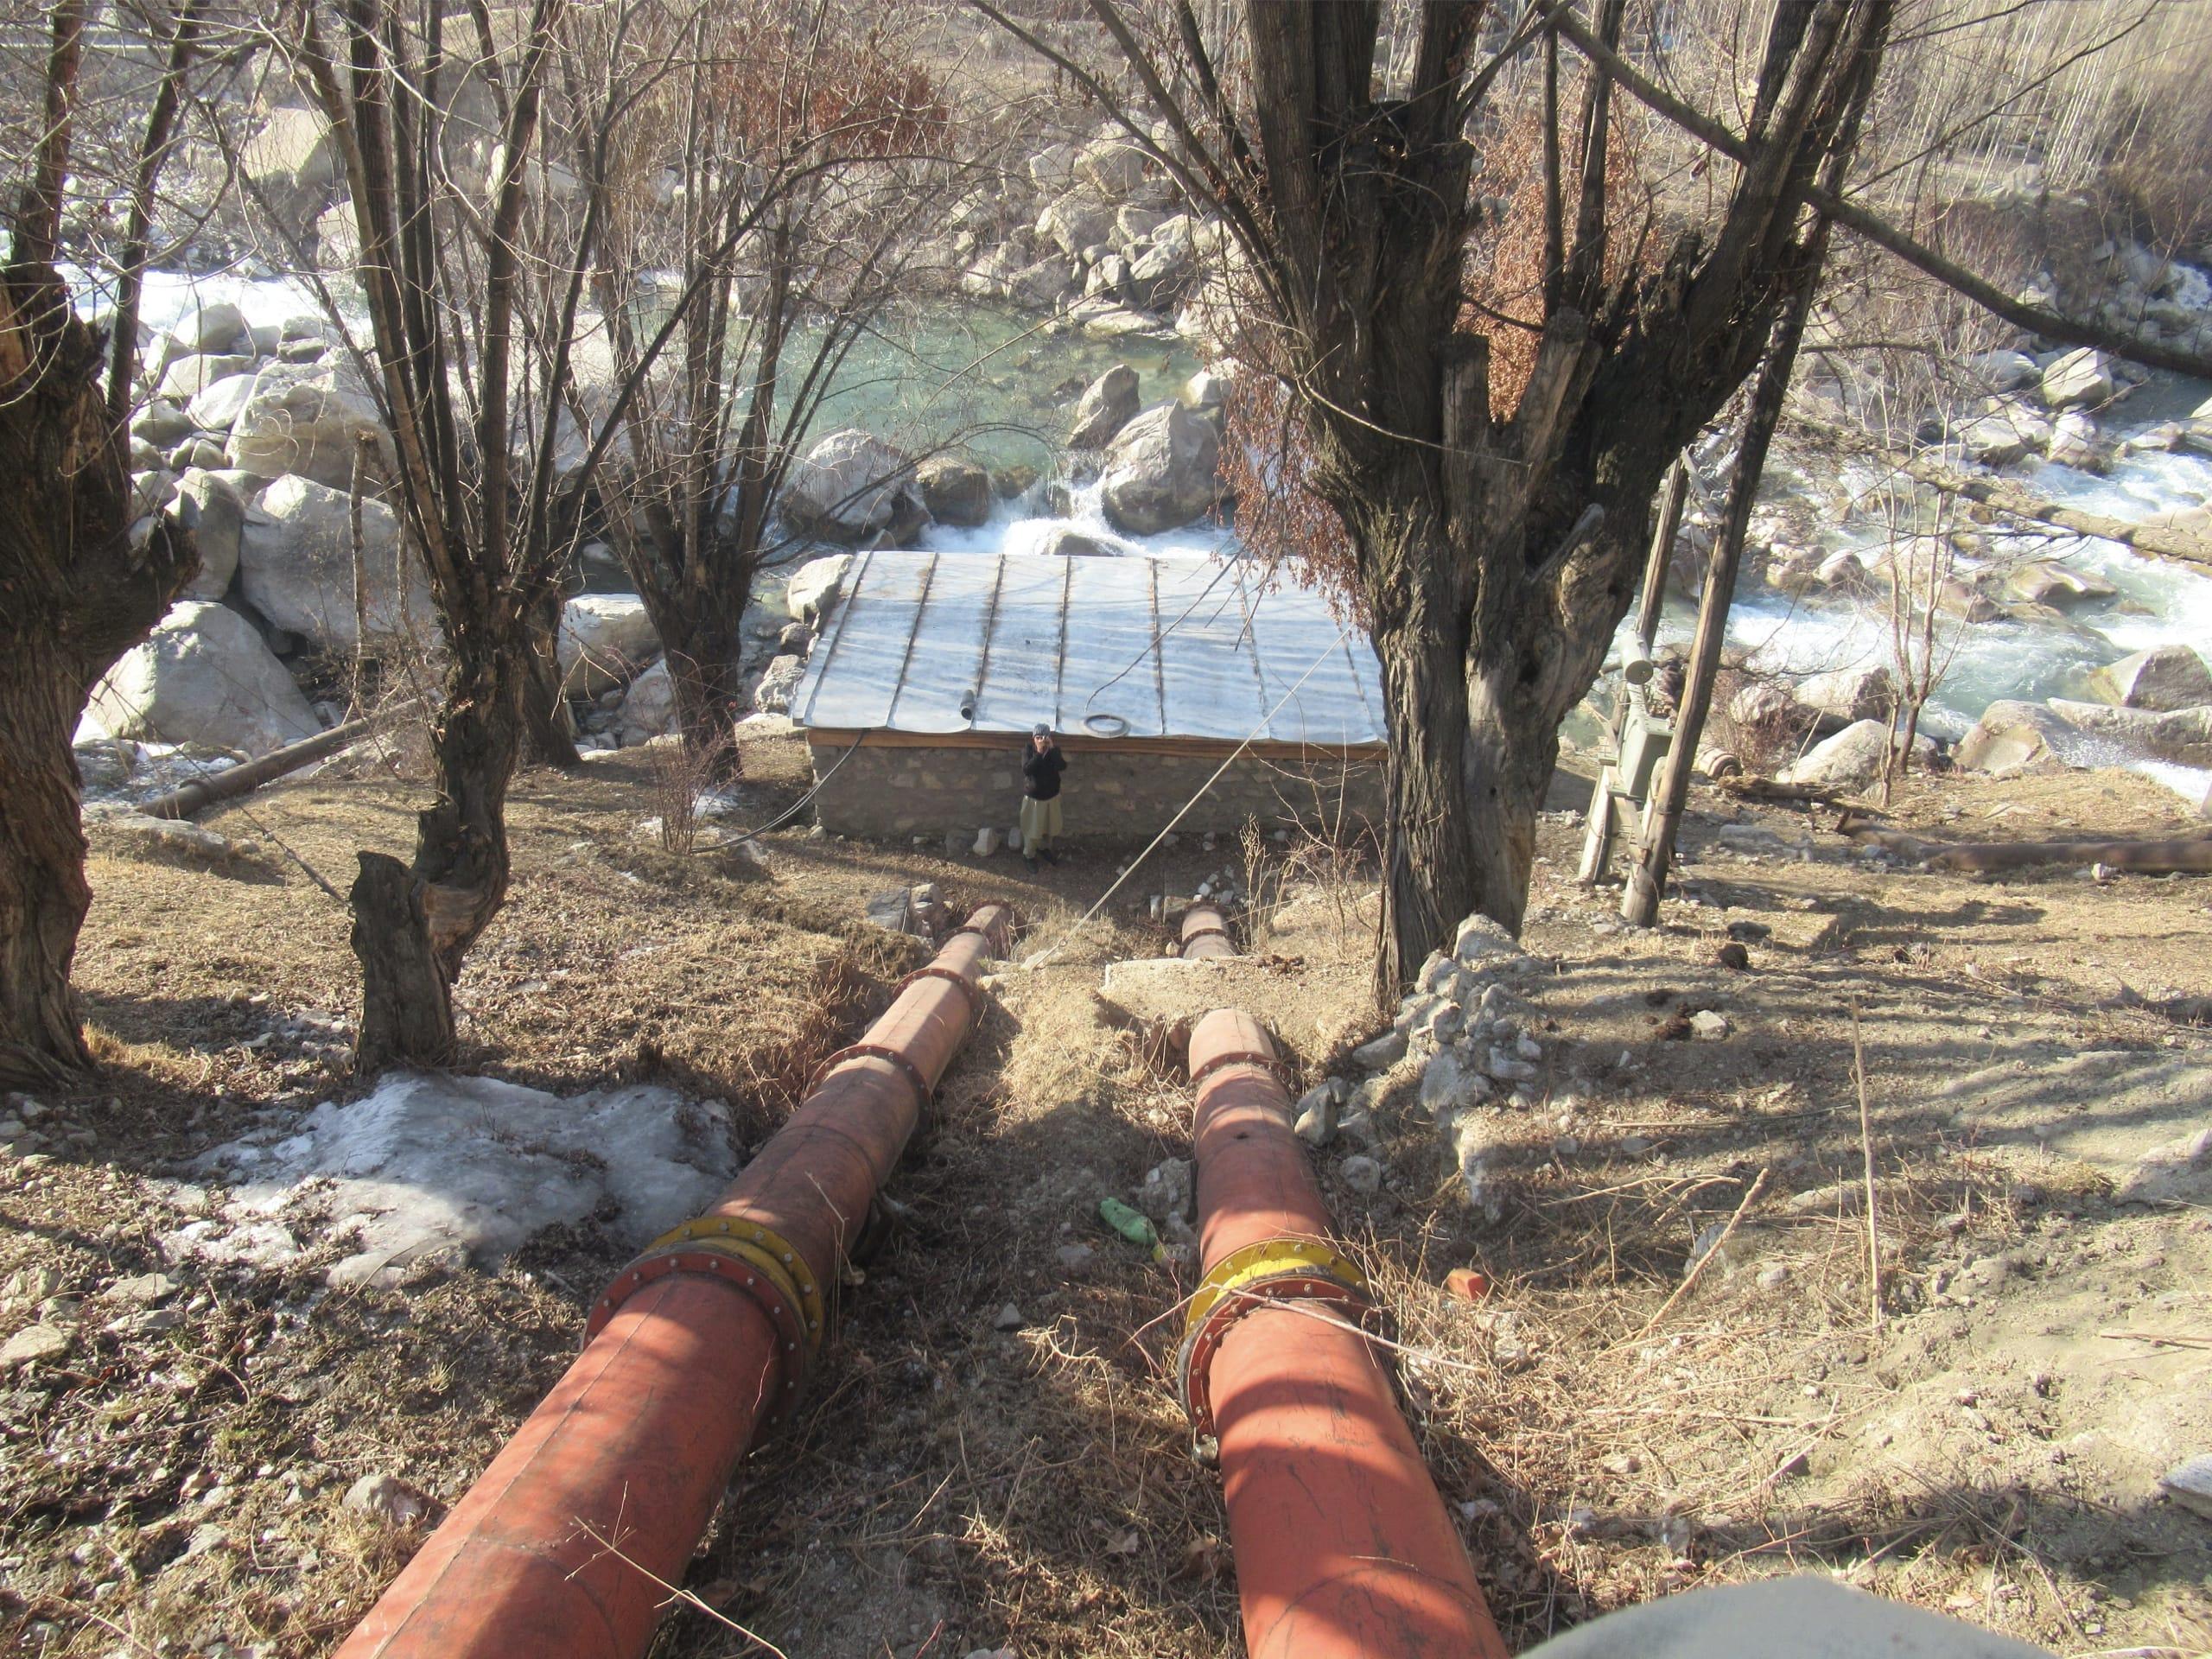 This MHP carries enough water for two penstocks connected to two turbines (see next photo).